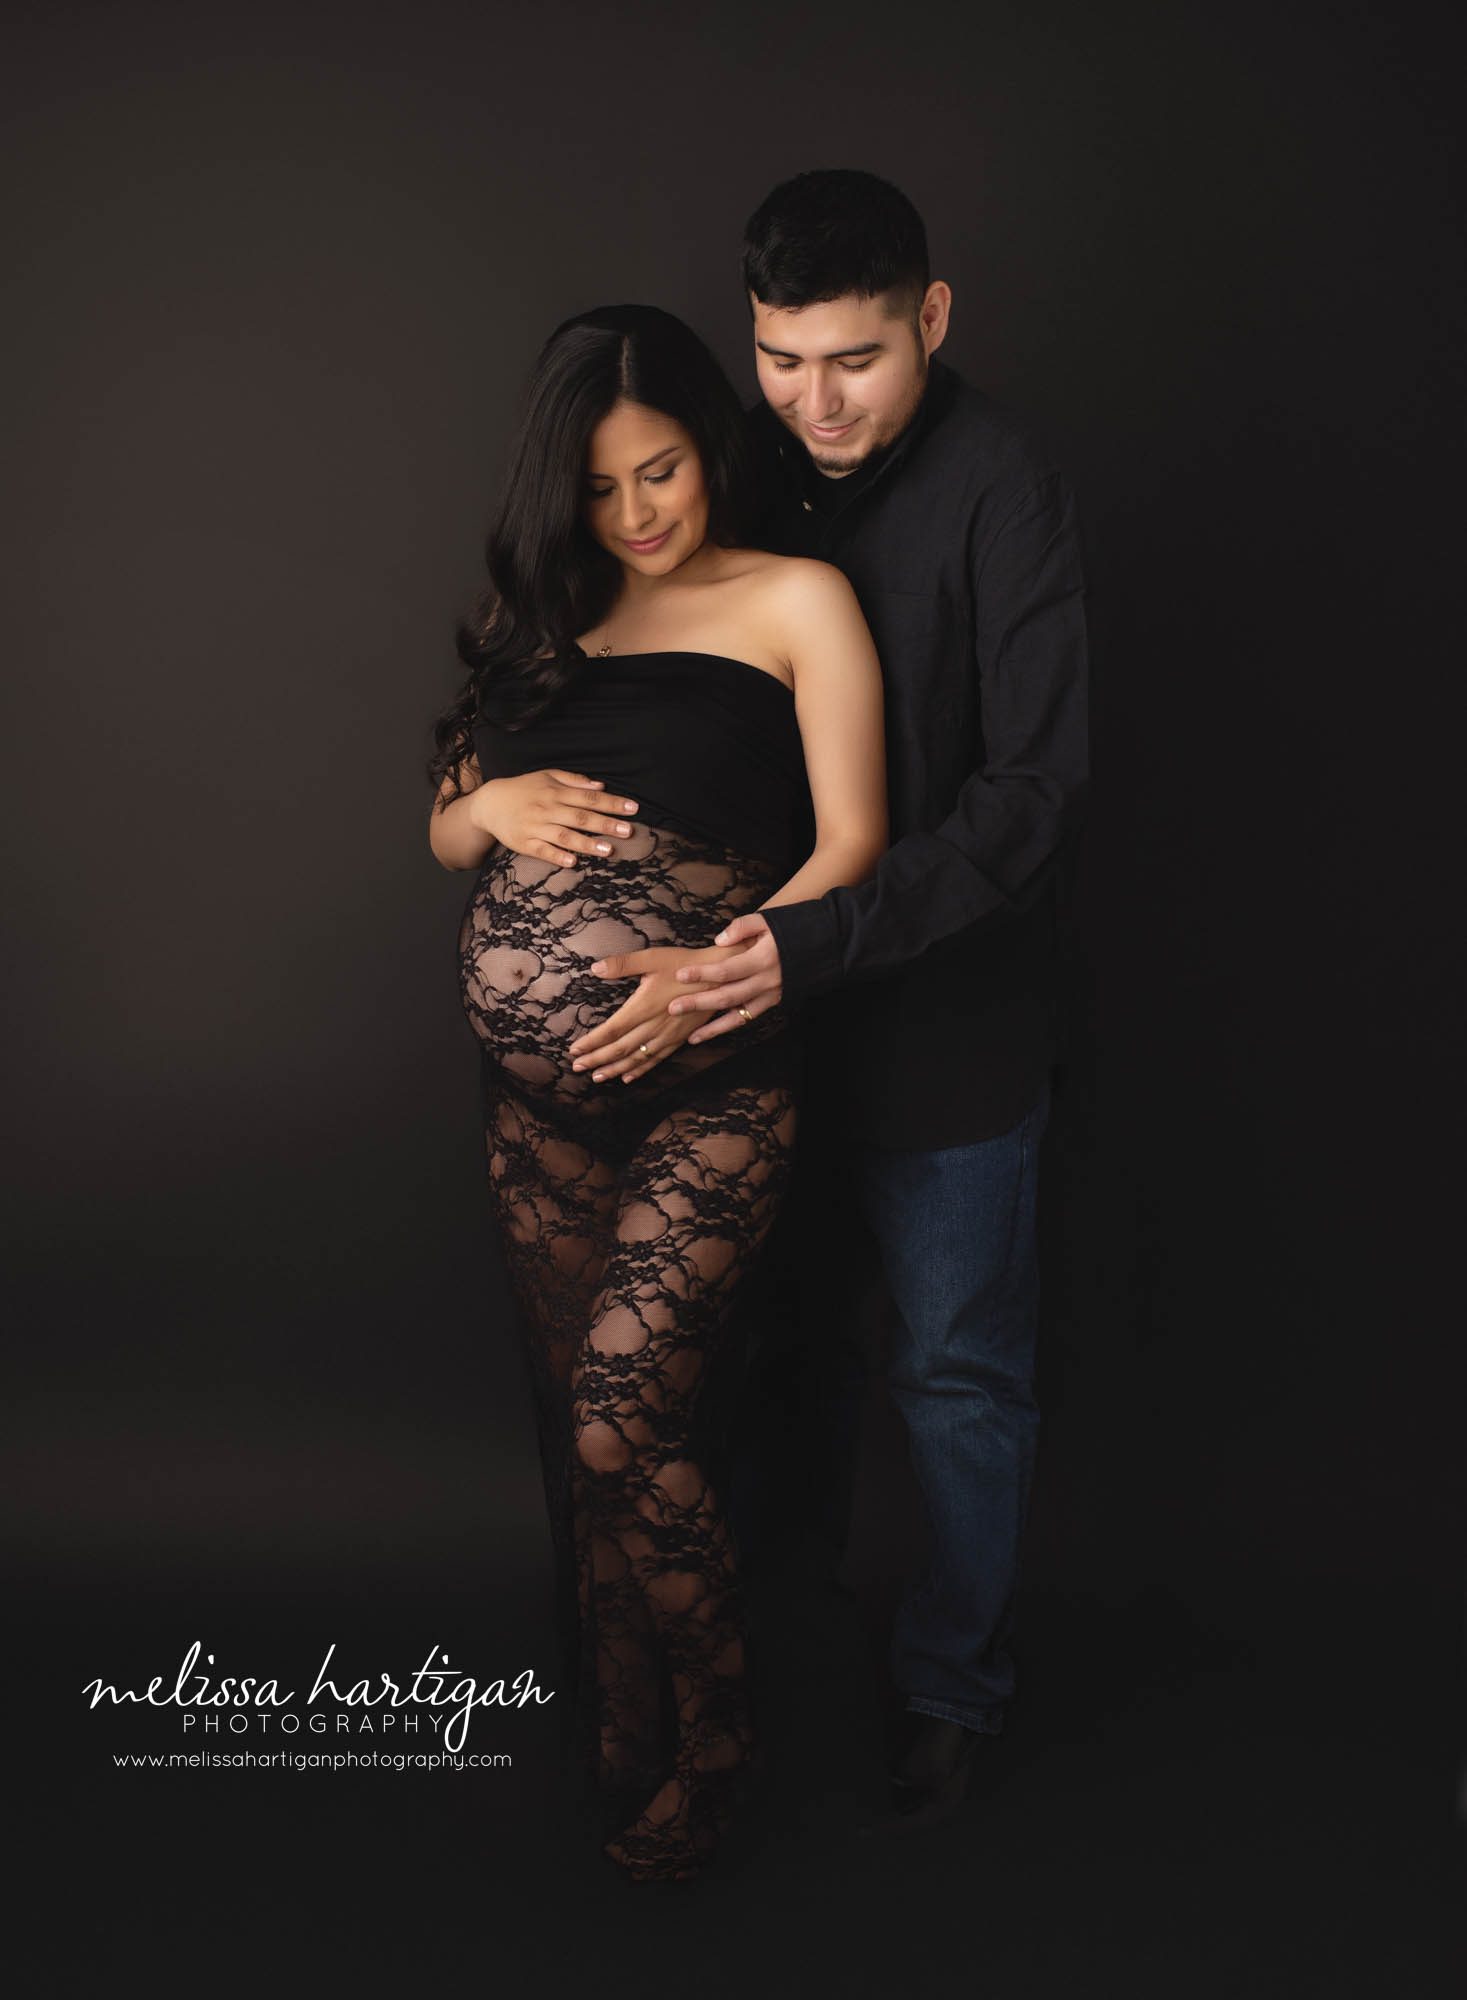 mom and dad to be standing in photography studio holding baby bump looking down happy smiling at pregnant baby belly